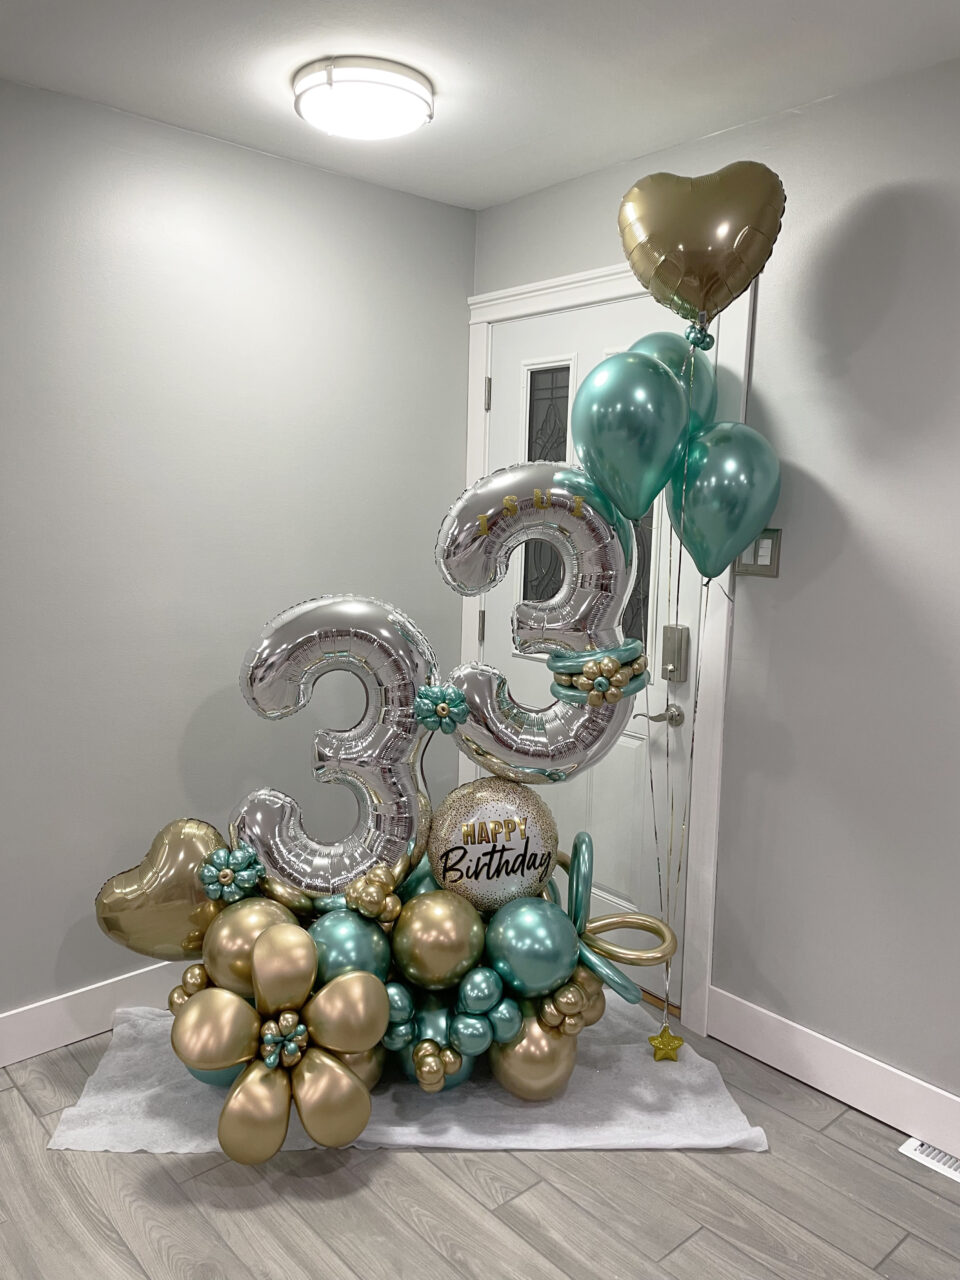 Balloons for 33rd birthday